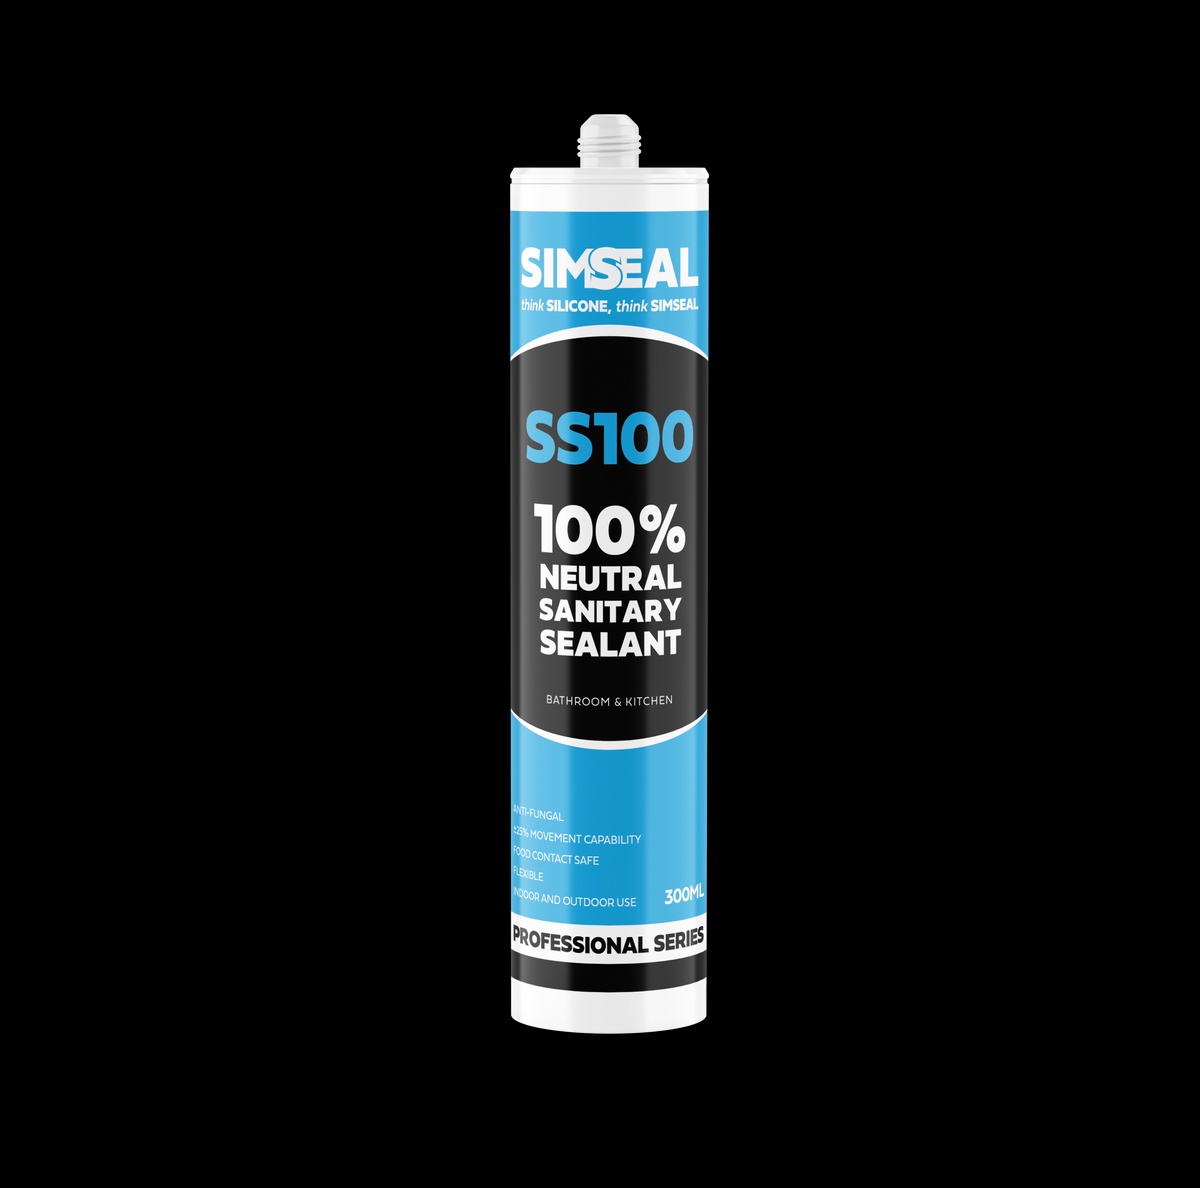 Enhancing Protection: Simseal's Superior Silicone Sealant Solutions